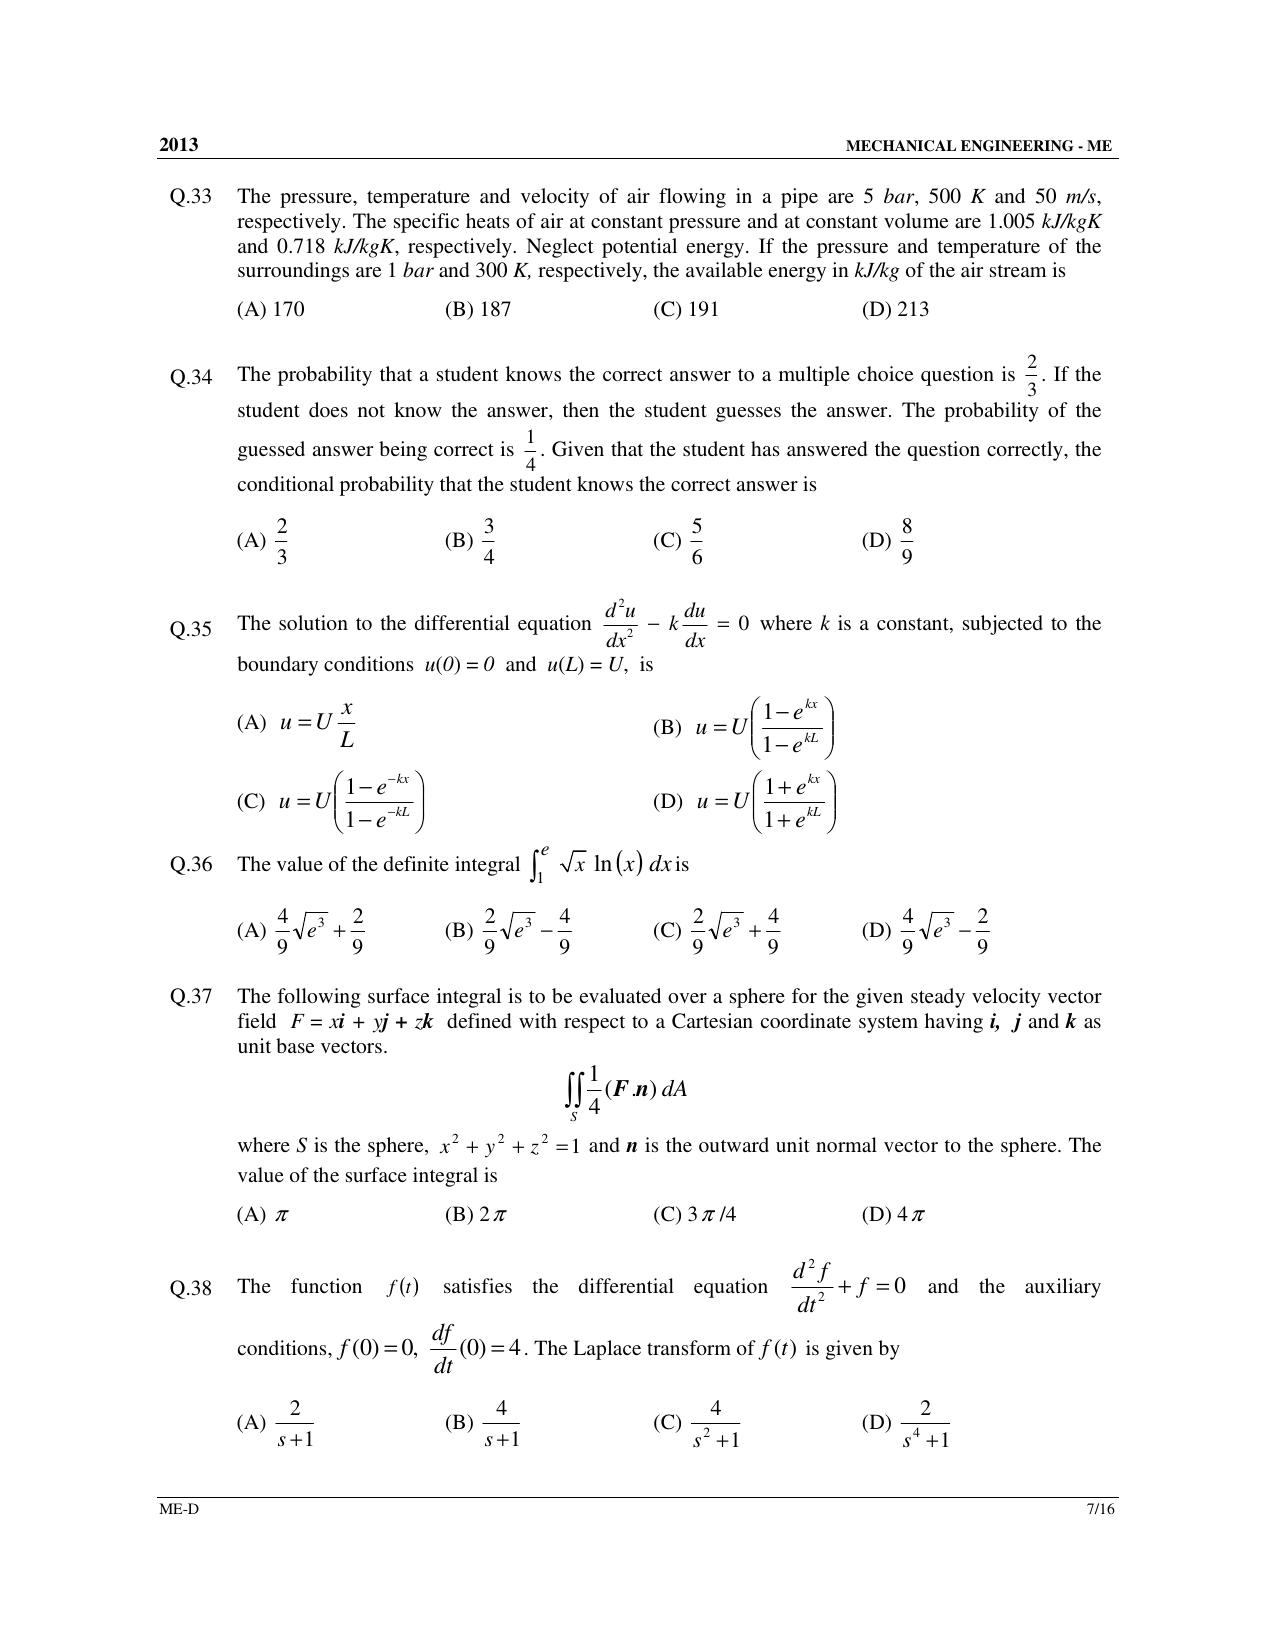 GATE 2013 Mechanical Engineering (ME) Question Paper with Answer Key - Page 50